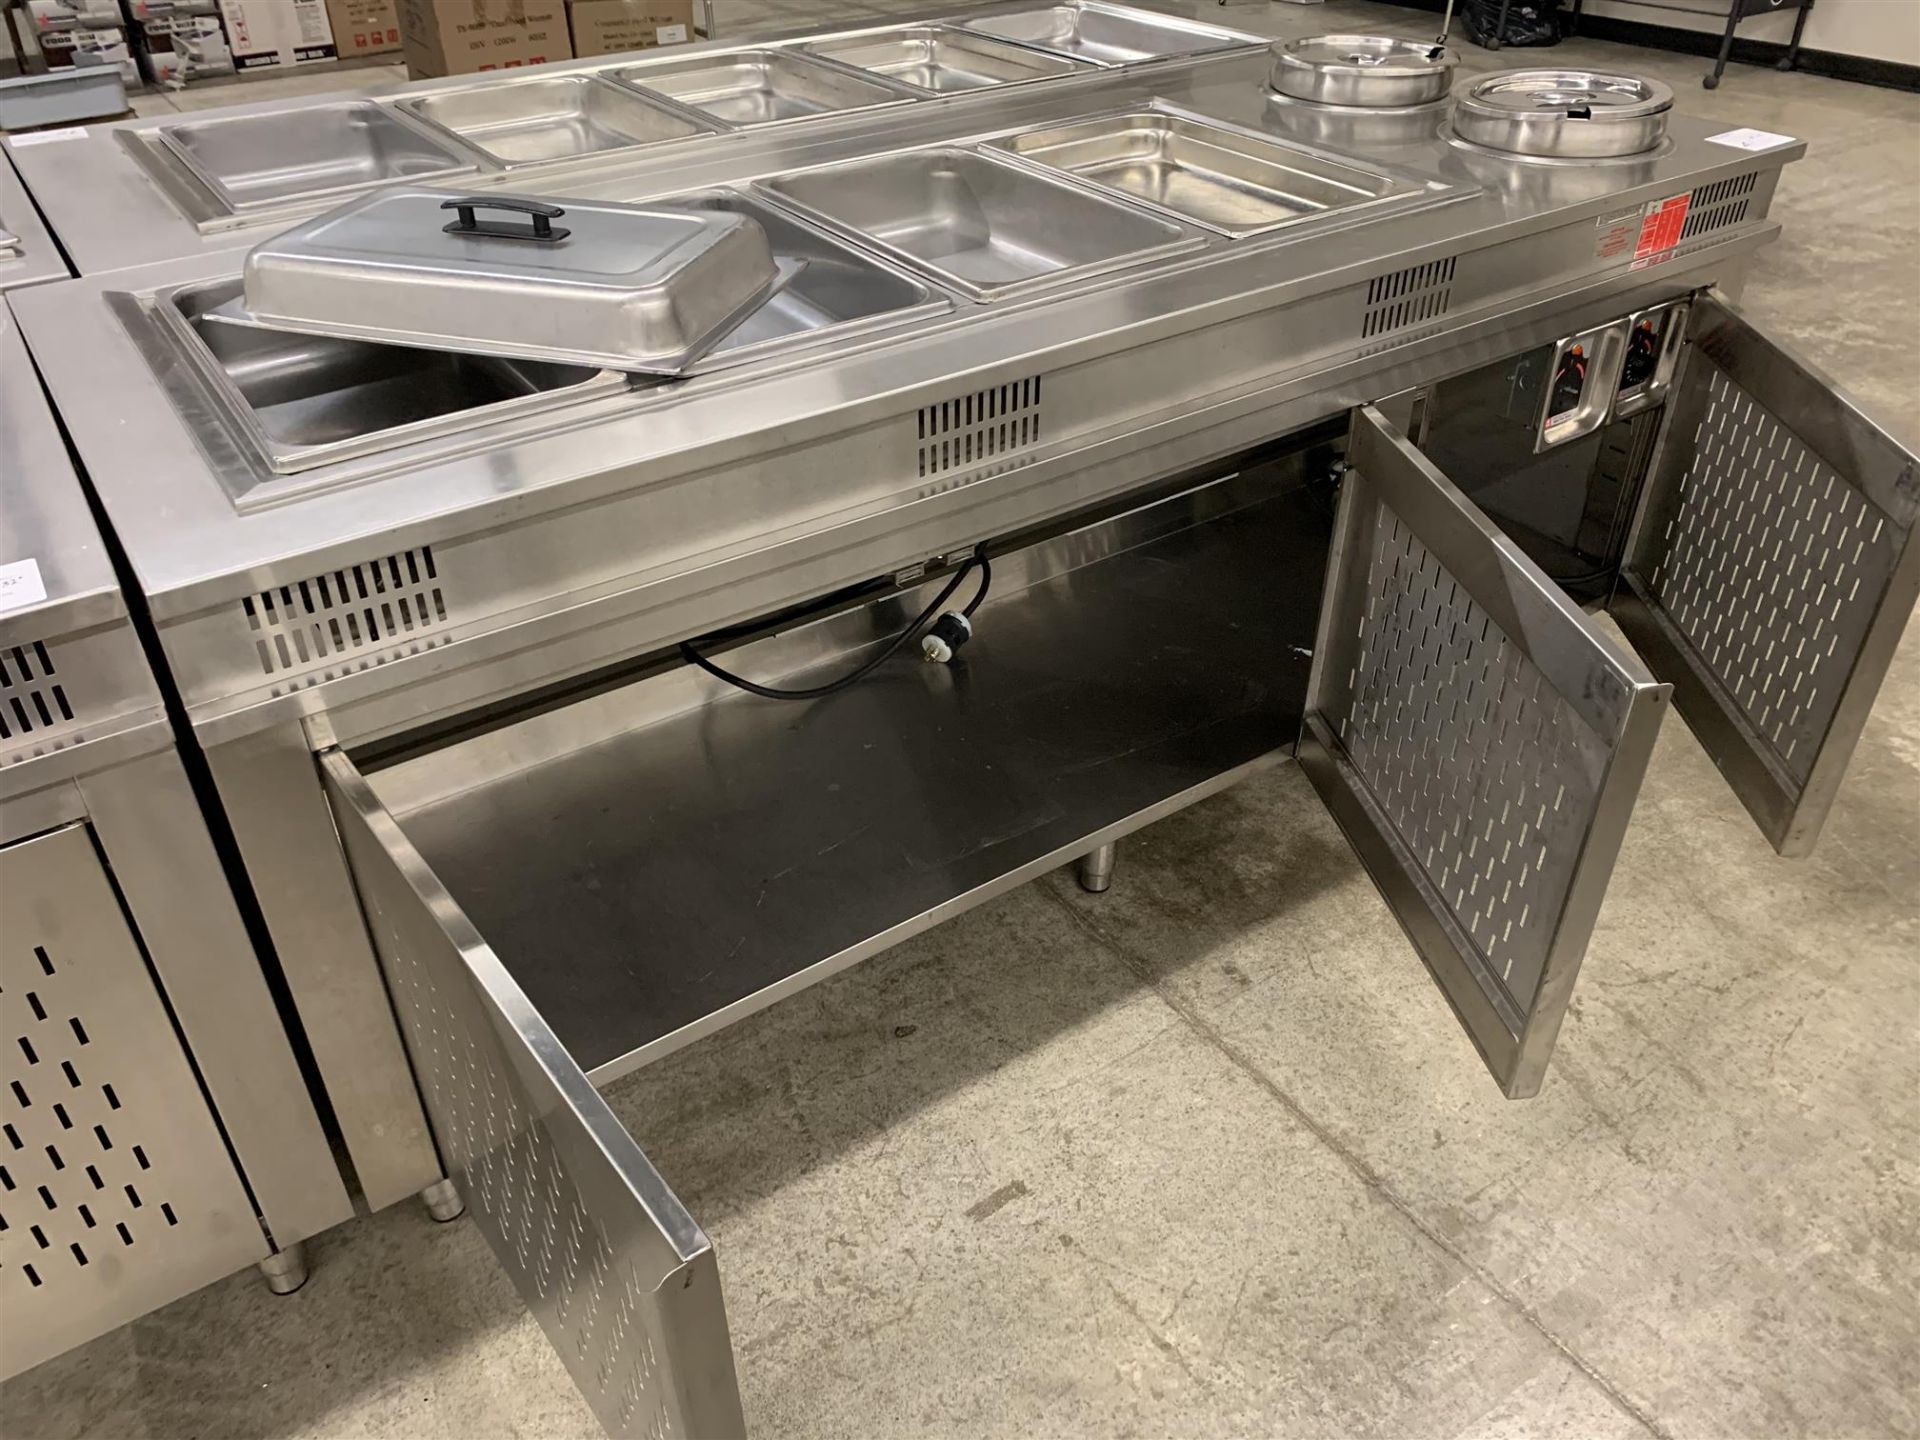 84" X 32" STAINLESS STEEL - BUFFET FOOD WARMER STATION W/4 x INSERTS + 2 SOUP INSERTS - Image 4 of 4